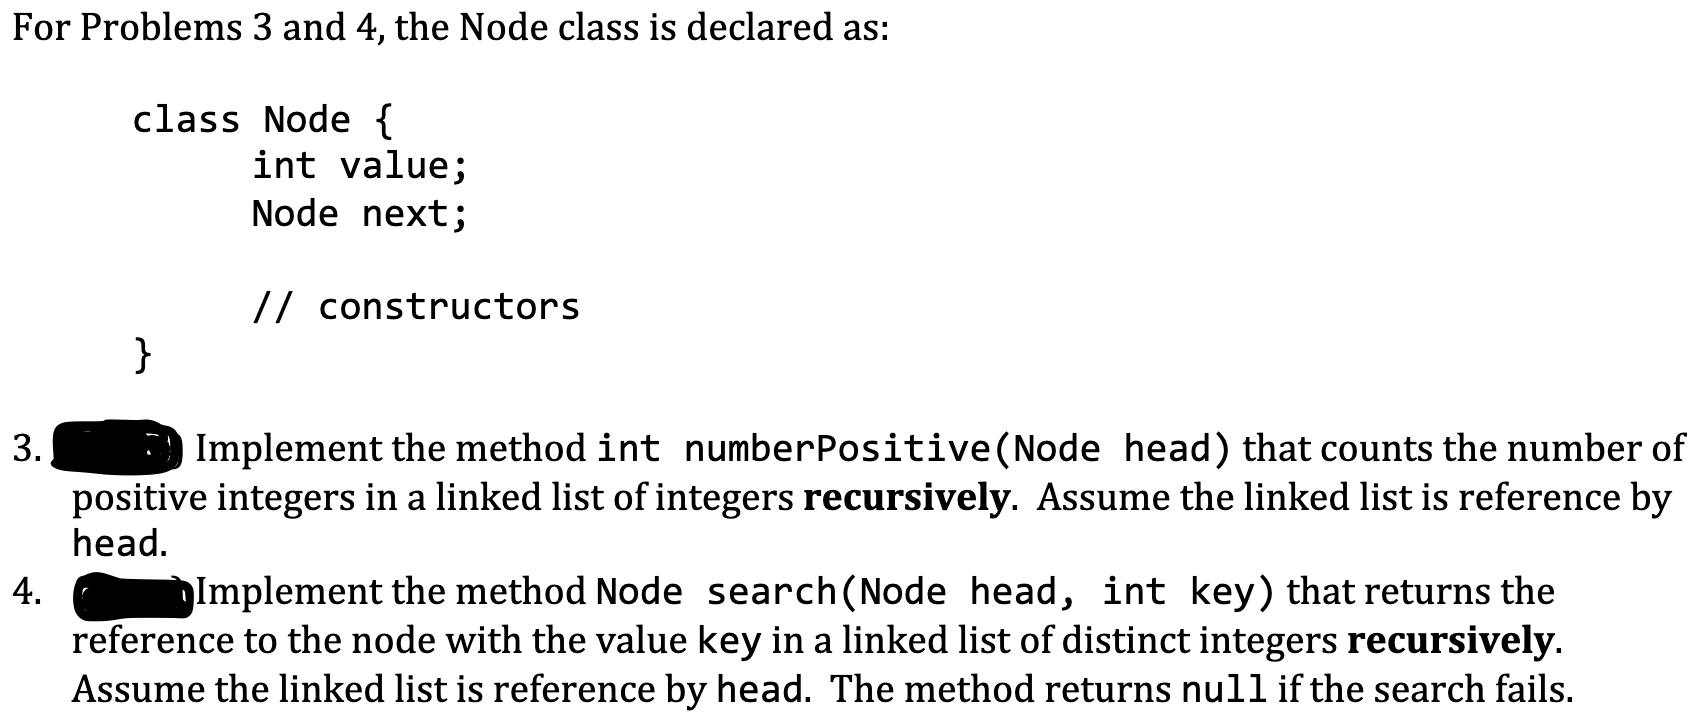 For Problems 3 and 4, the Node class is declared as:
class Node {
int value;
Node next;
// constructors
}
Implement the method int numberPositive(Node head) that counts the numbe
positive integers in a linked list of integers recursively. Assume the linked list is reference
3.
head.
Implement the method Node search (Node head, int key) that returns the
reference to the node with the value key in a linked list of distinct integers recursively.
4.
Assume the linked list is reference by head. The method returns null if the search fails.
